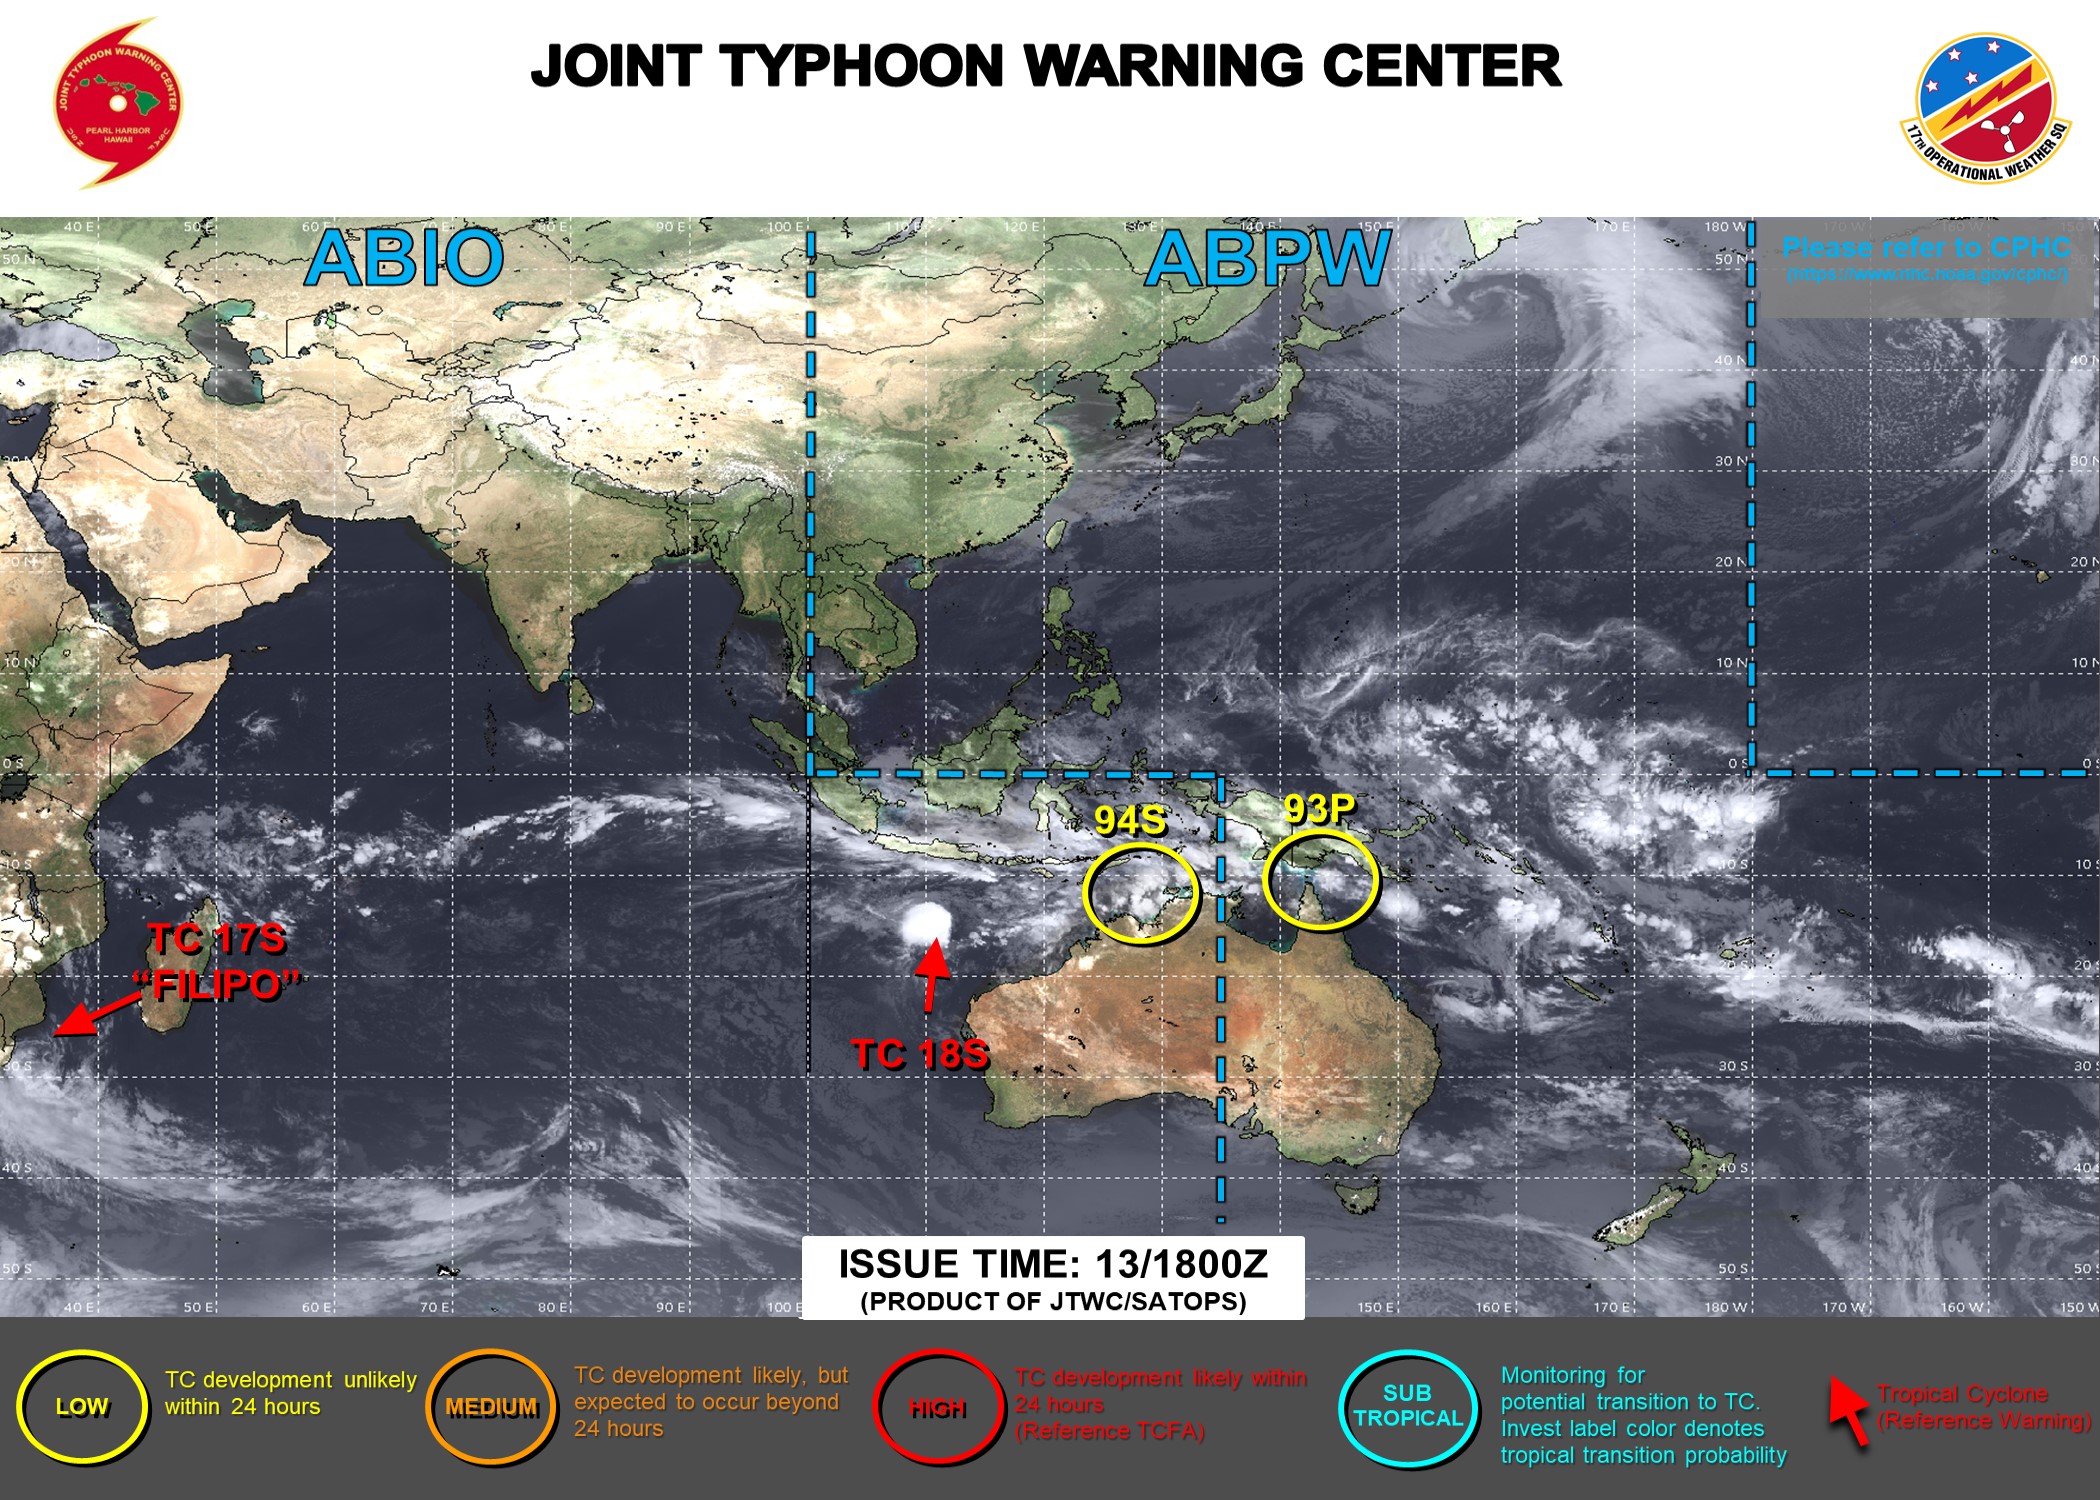 JTWC IS ISSUING 6HOURLY WARNINGS AND 3HOURLY SATELLITE BULLETINS ON TC 18S. JTWC IS ISSUING 12HOURLY WARNINGS AND 3HOURLY SATELLITE BULLETINS ON TC 17S.